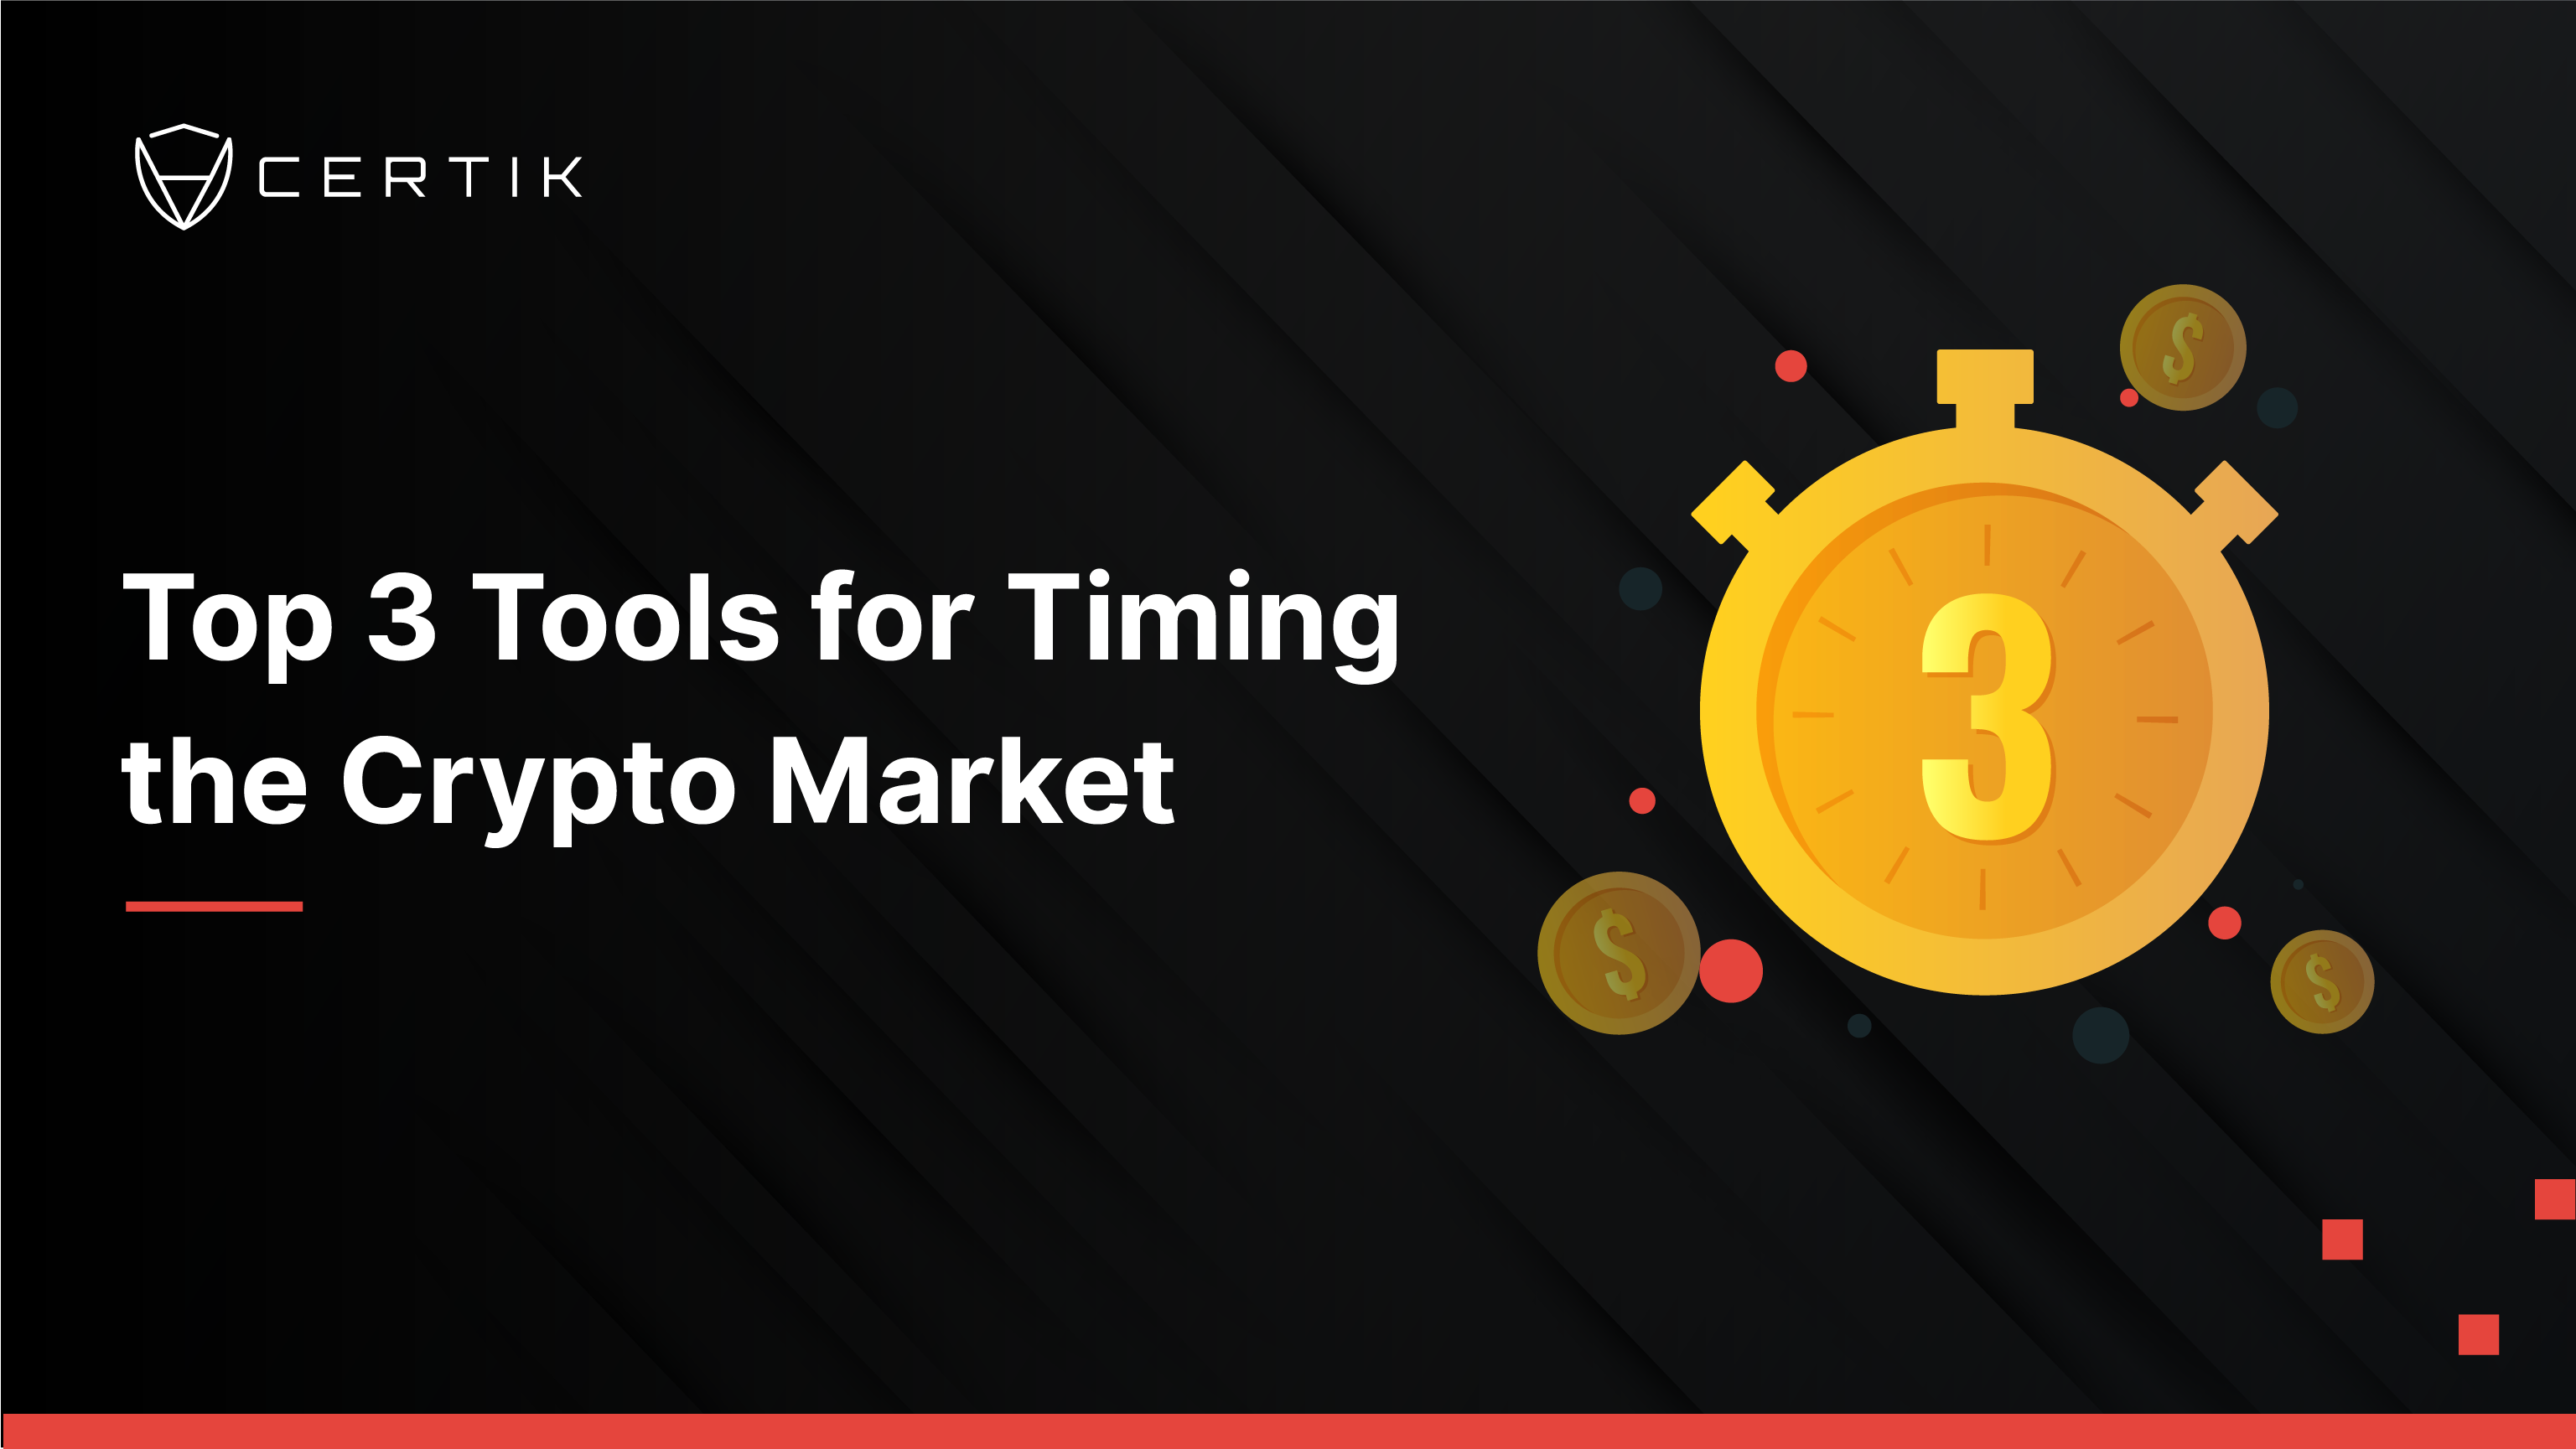 Top 3 Tools for Timing the Crypto Market